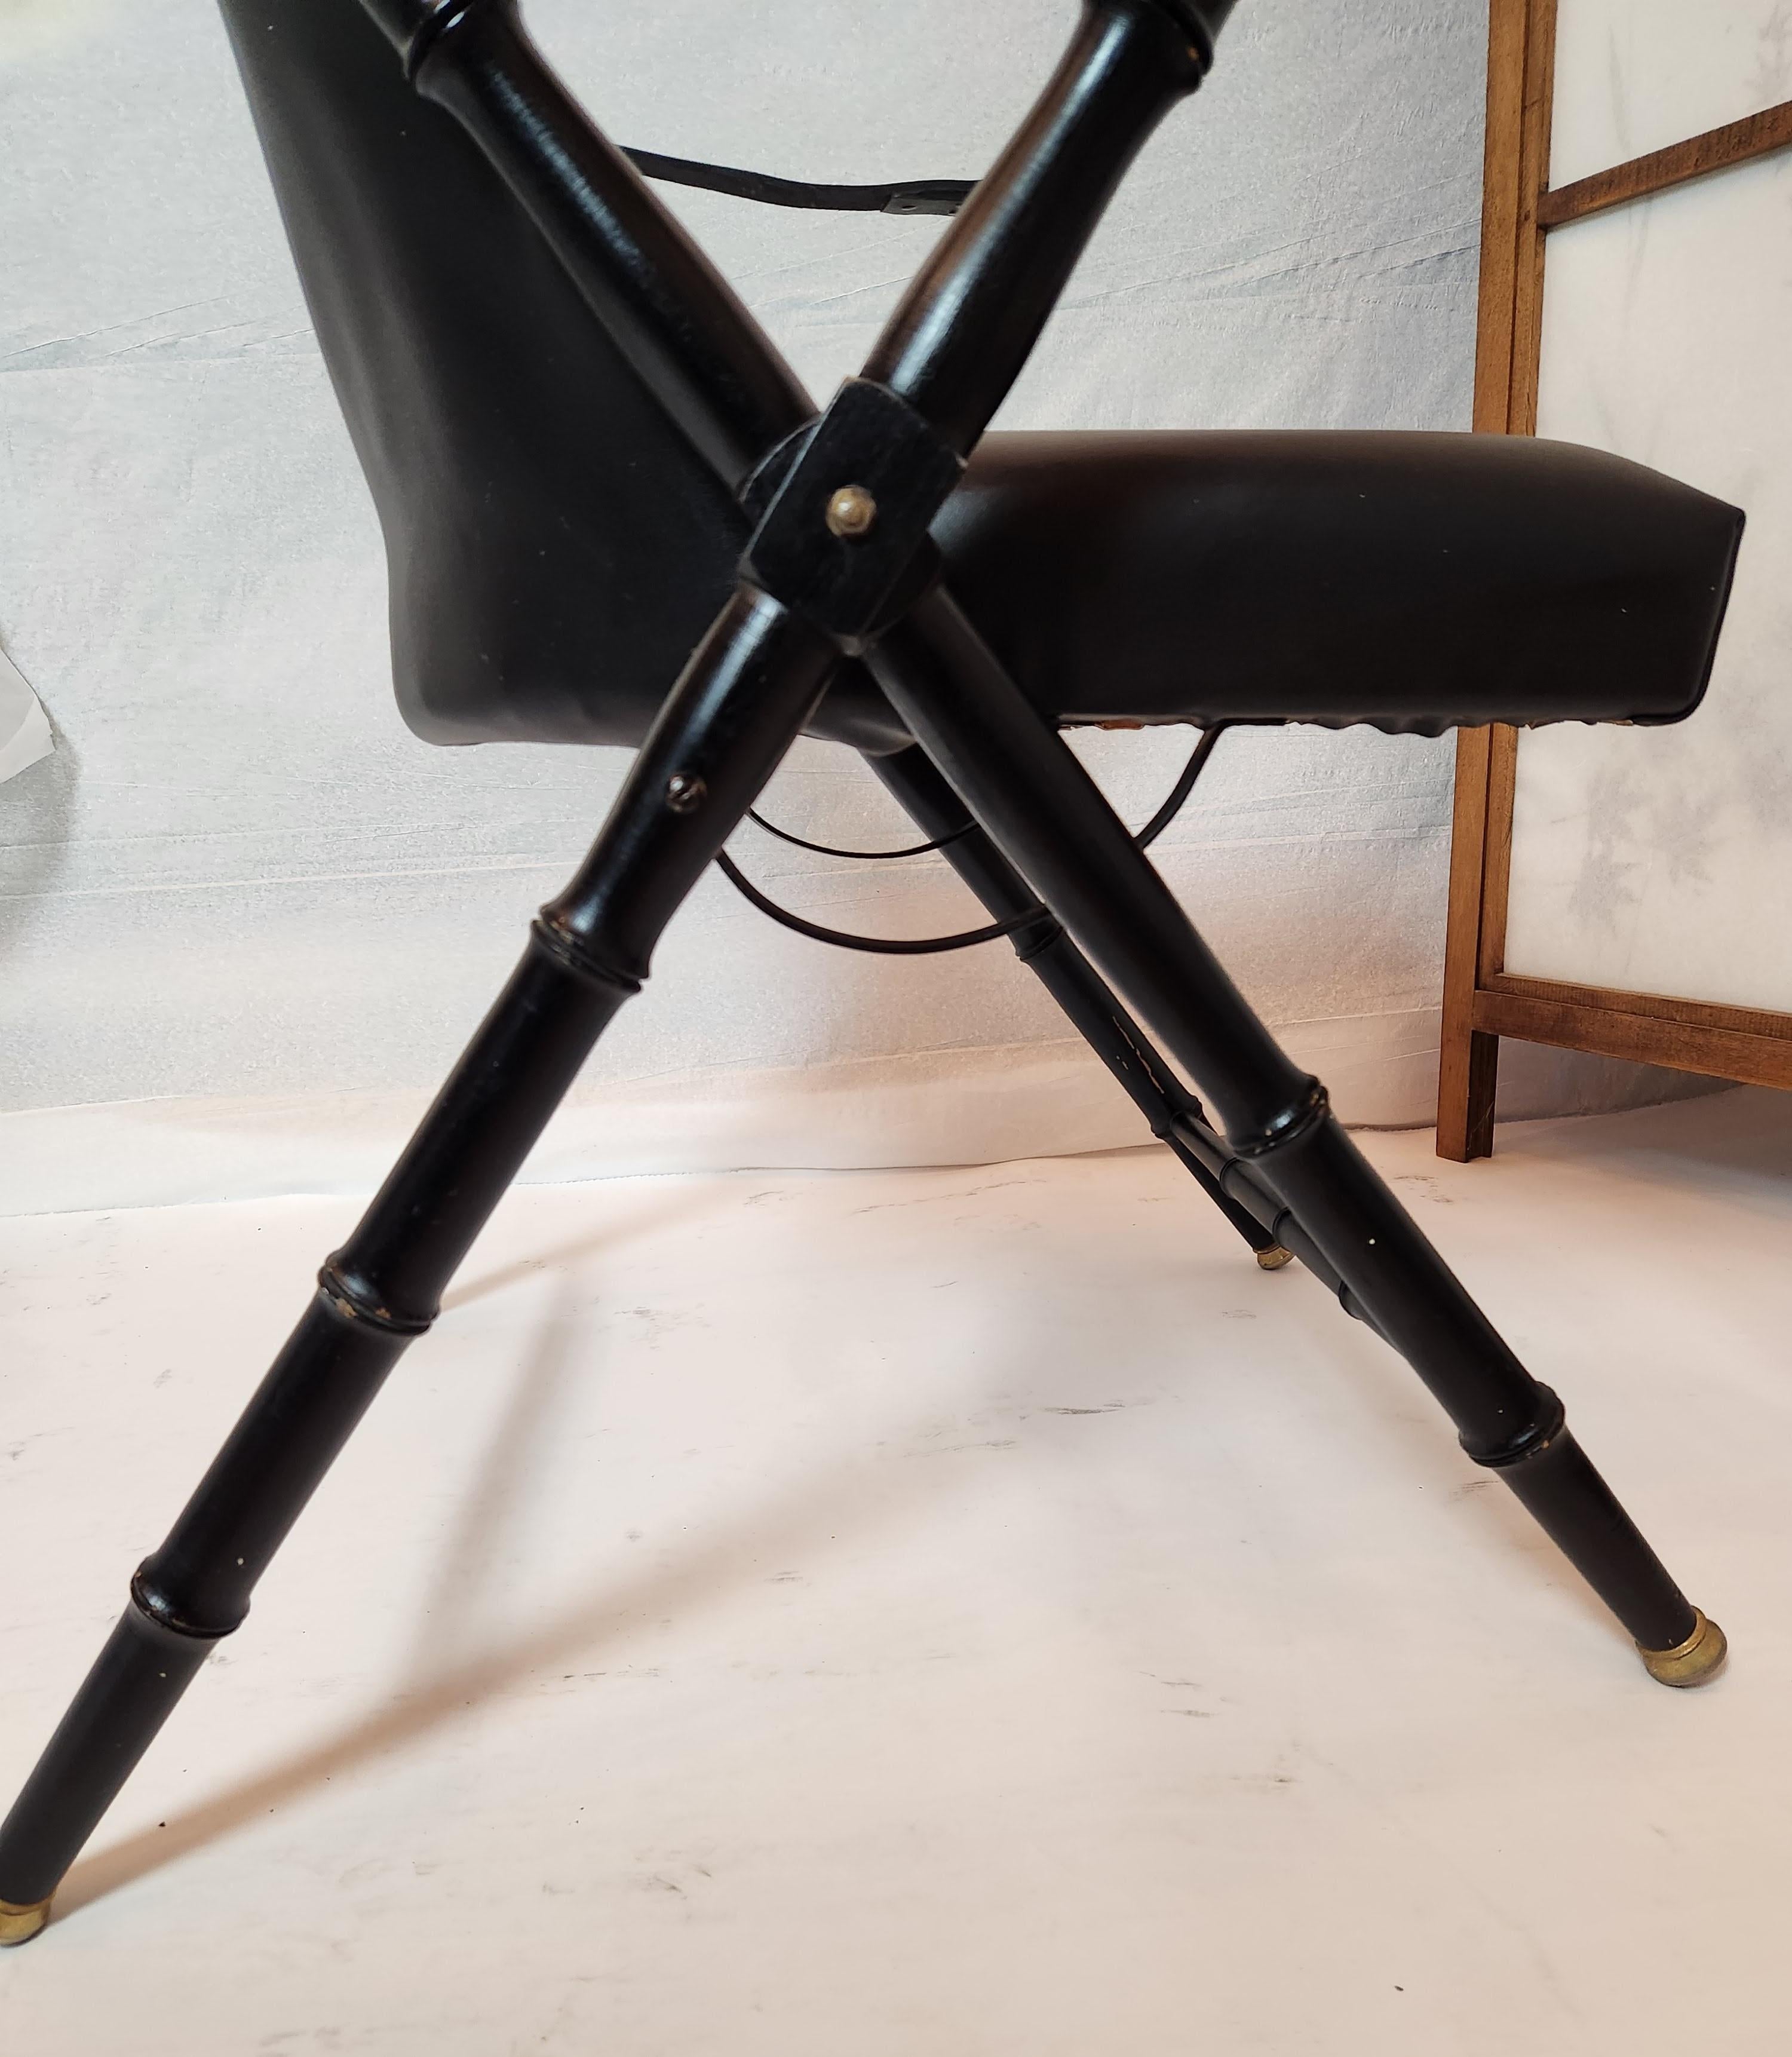 Brass Classic Italian Folding Campaign Chair in Black Leather, C. 1965 For Sale